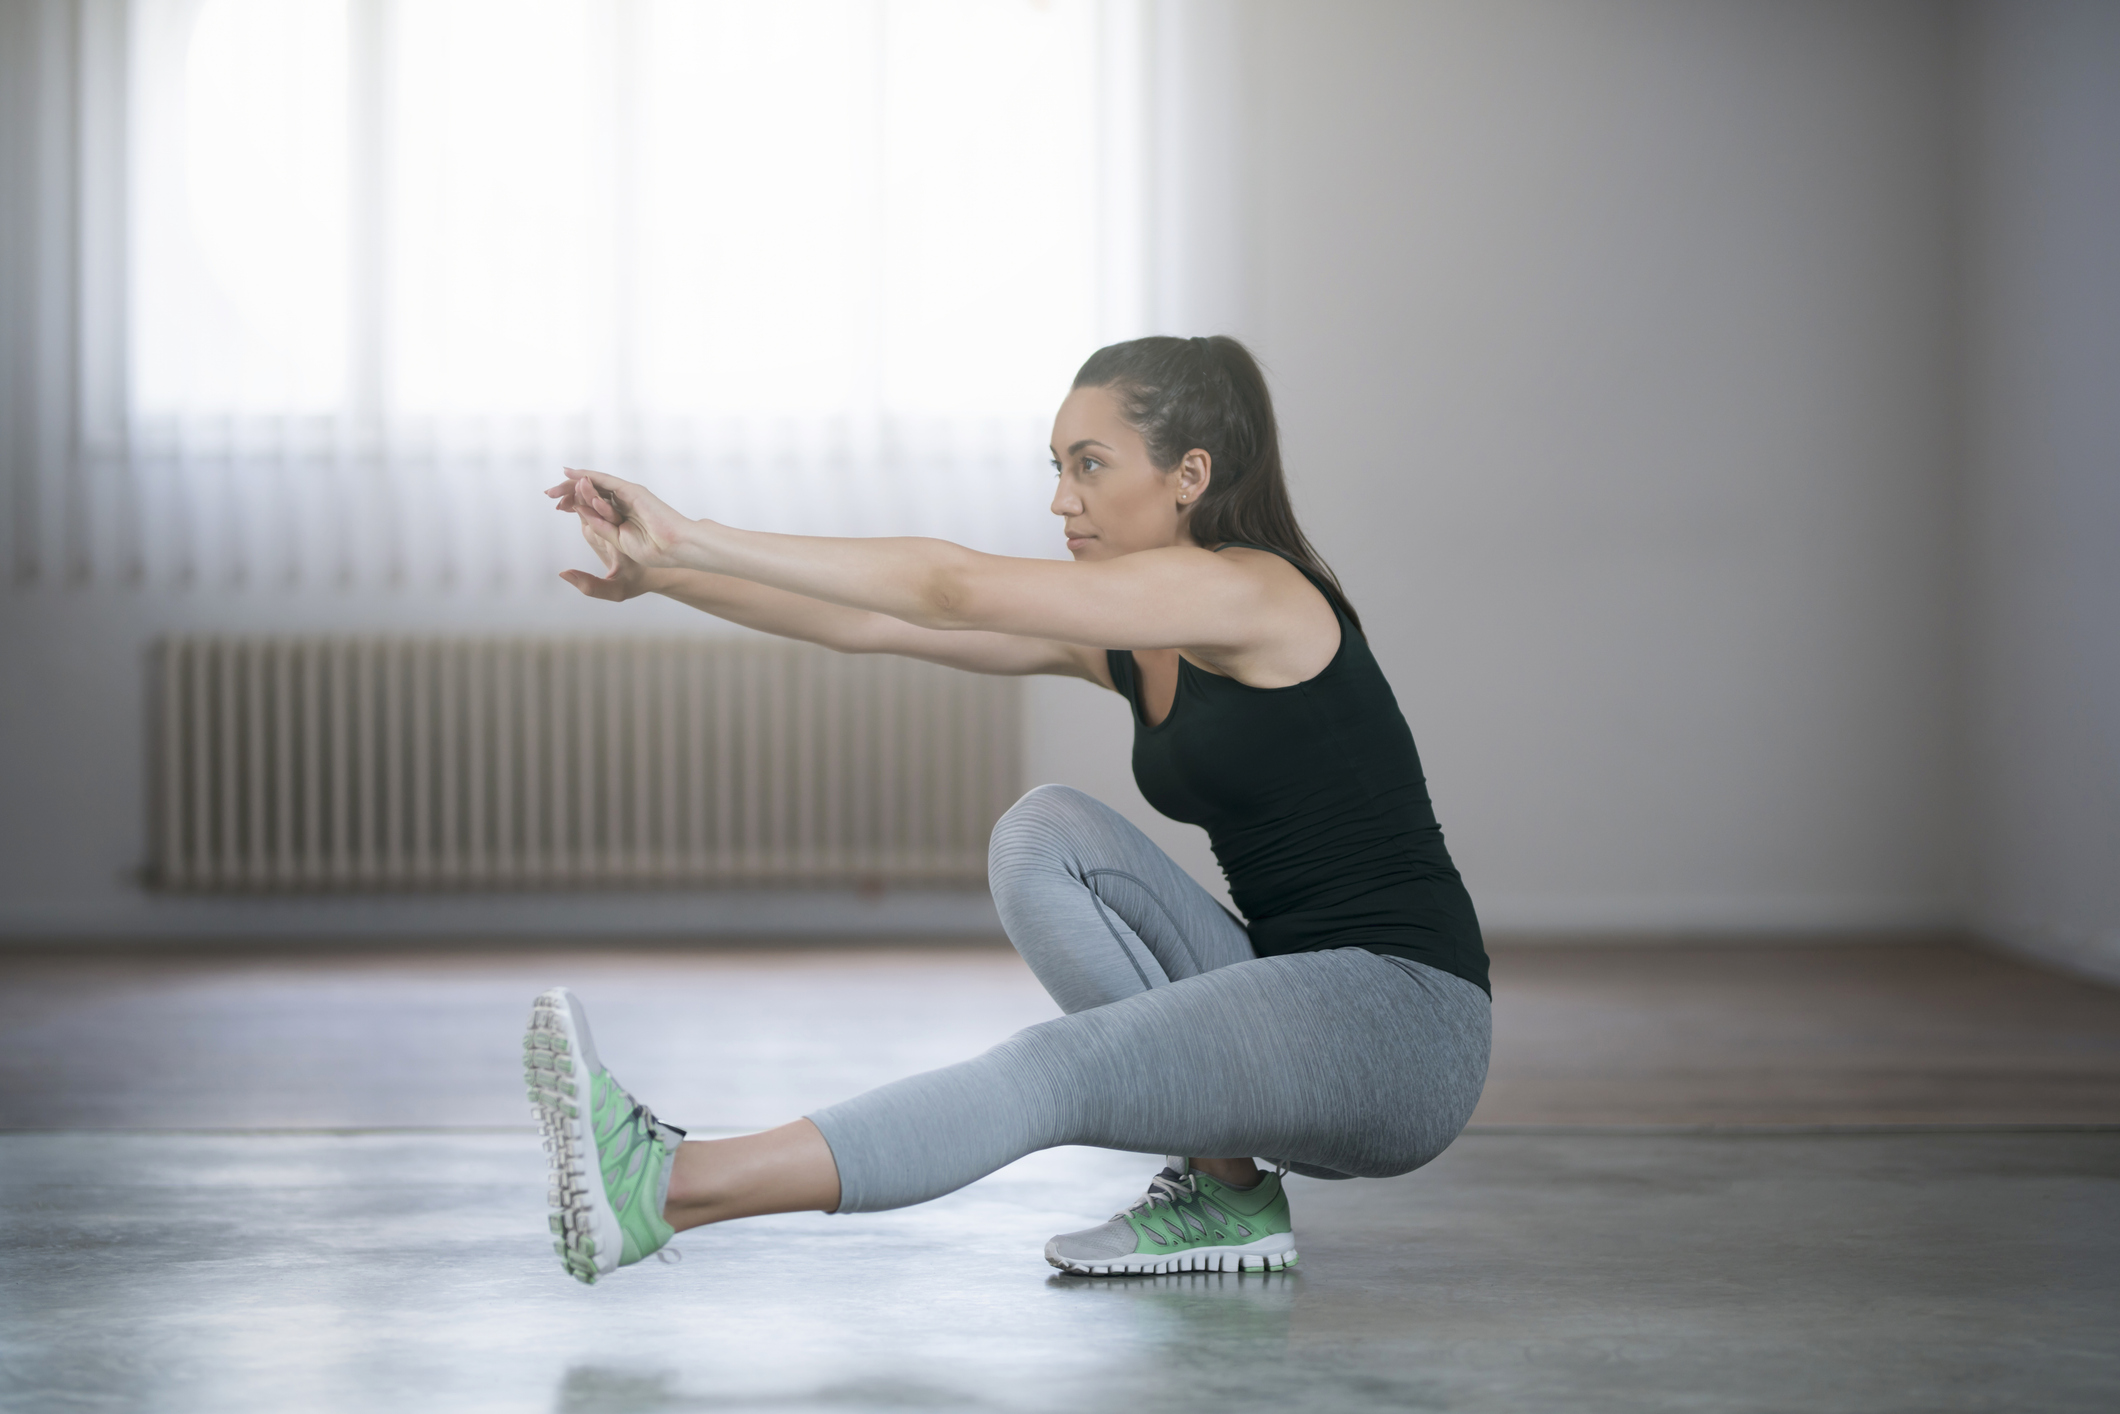 female trainer with a ponytail demonstrates a single-leg step down as the first part of a pistol squat progression